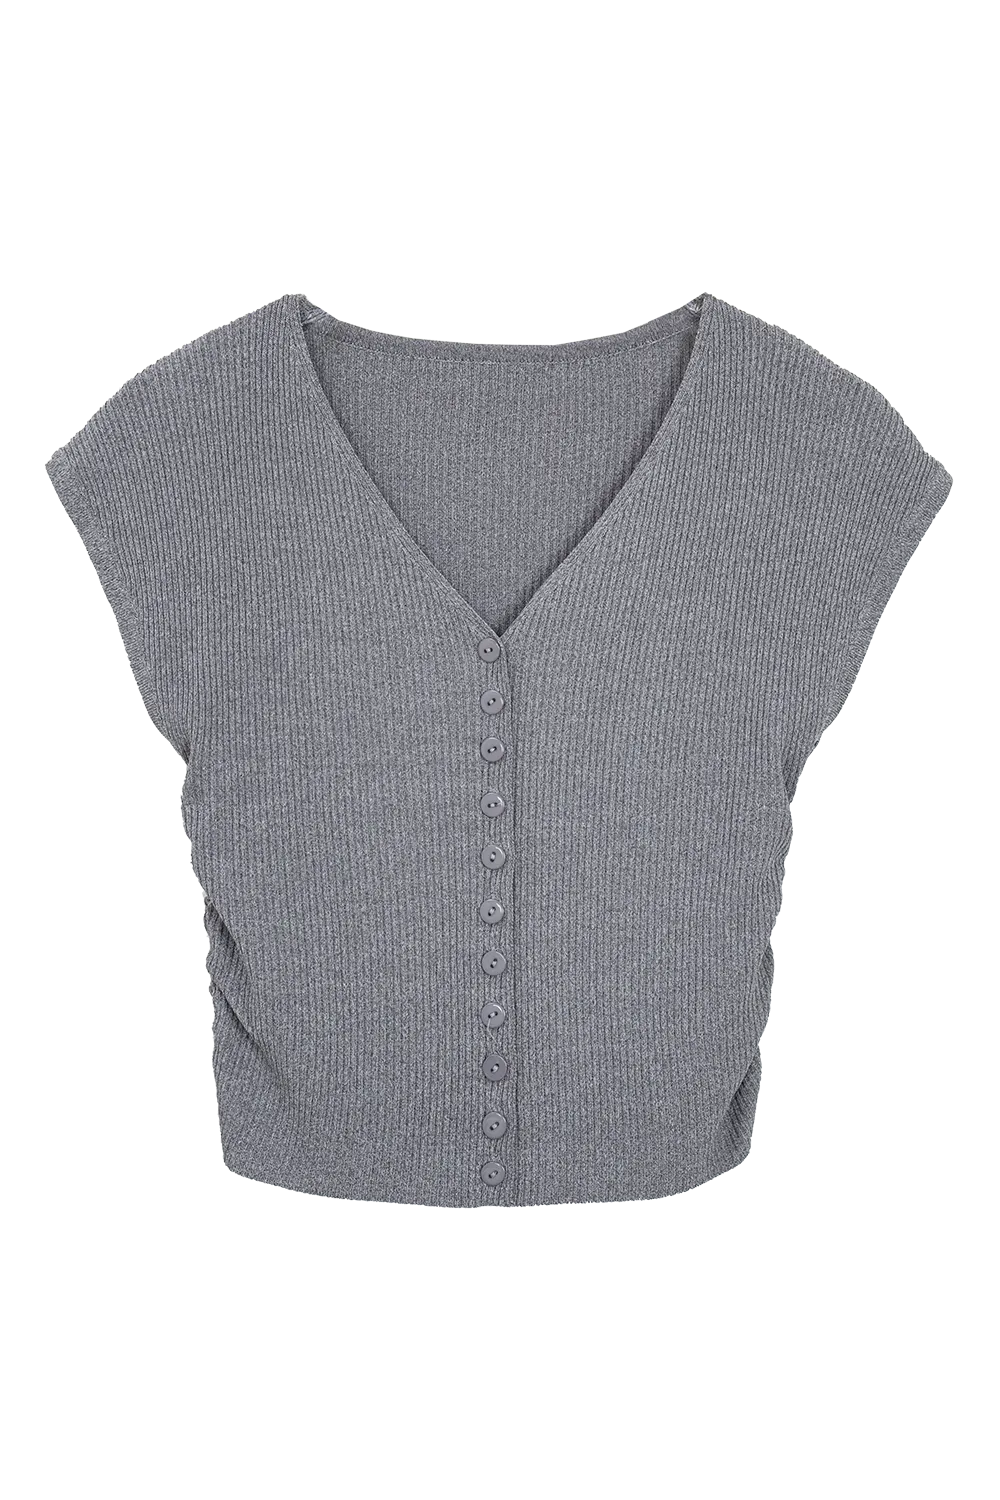 Ribbed V-Neck Top with Button-Up Front and Cap Sleeves